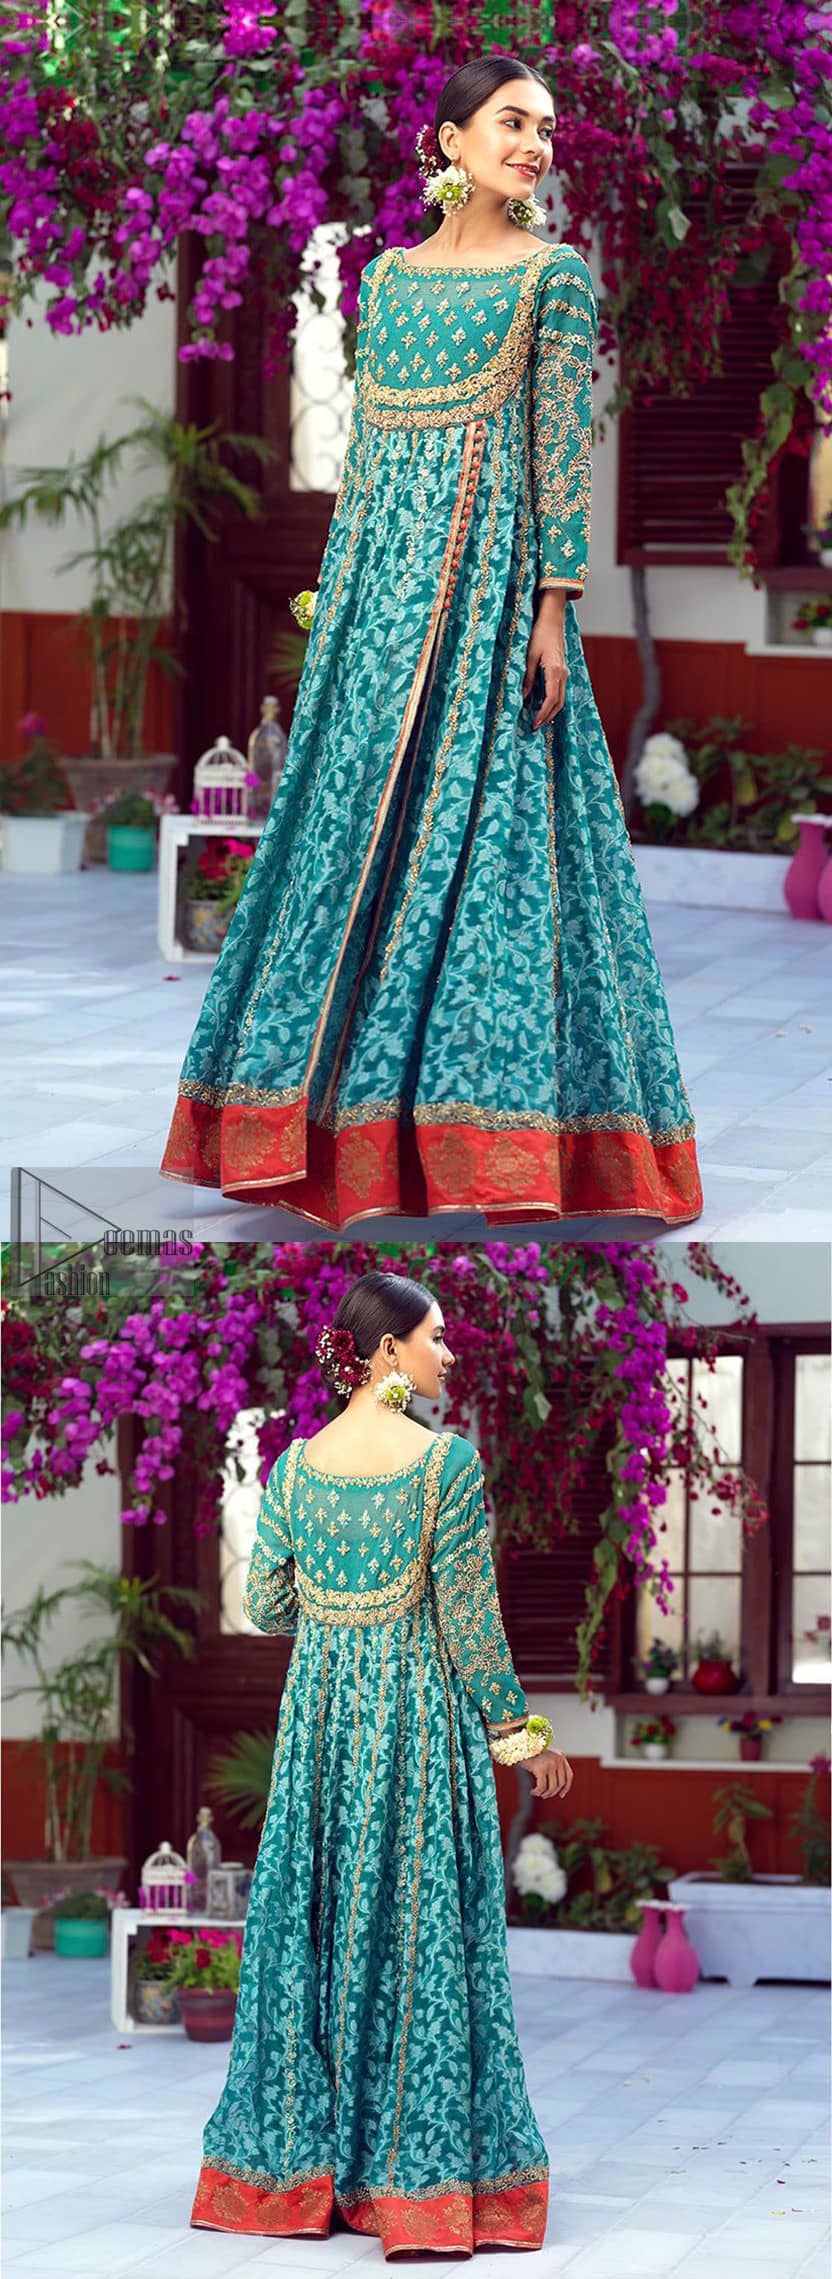 The perfect combination of tradition and class. With a lot of attention to detail, the intricate zardozi work with using glass beading and threads makes the bodice look like nothing but a dream. The tiny floral motifs are also scattered on the bodice. This mehndi outfit is ornamented with vertical embroidered lines and coral applique at the bottom. It comprises with sea green capri pants emphasized with embellished bottom and coral self fabric dupattta. You are all set to make a lasting impact with the divine royalty of this dress.